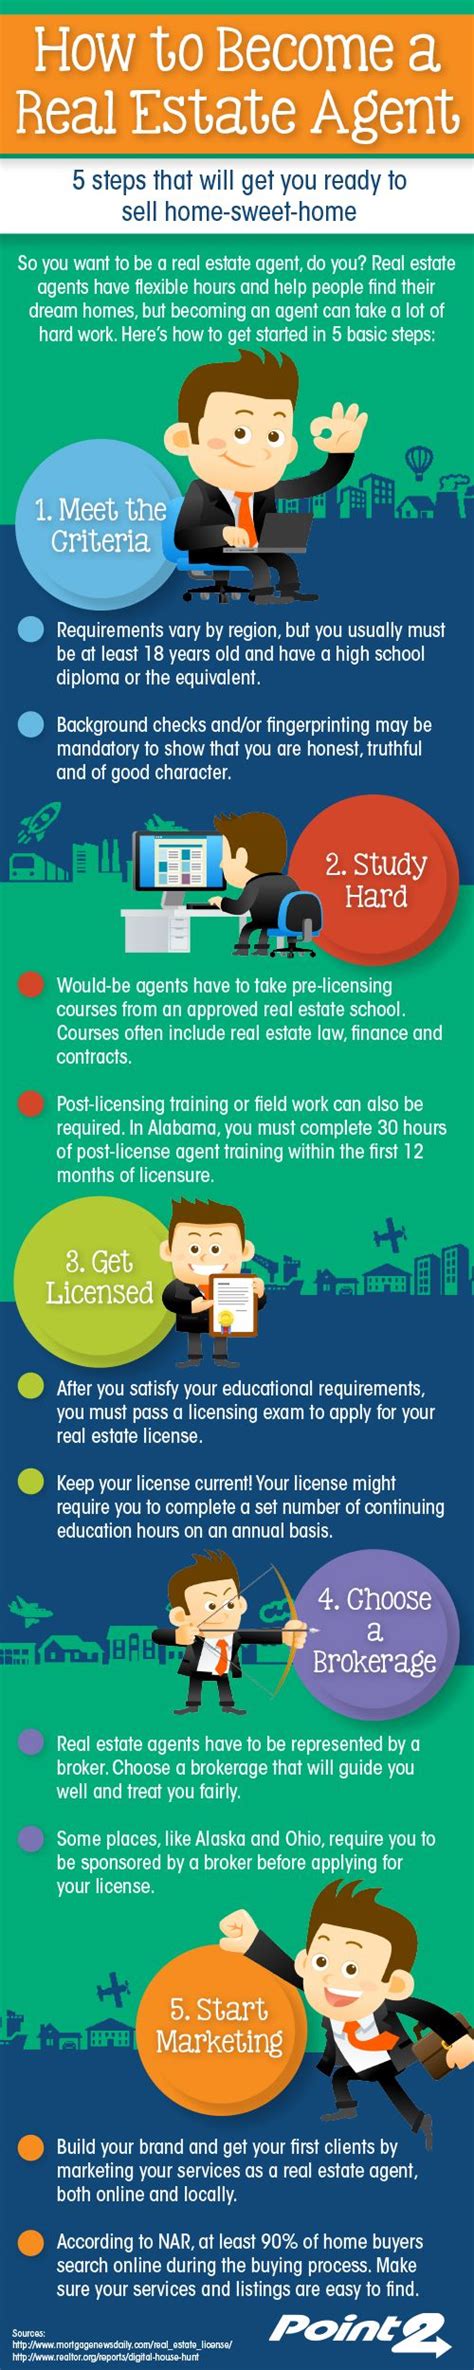 Can you become a real estate agent with a is there a demand for real estate agents in illinois? How to Become a Real Estate Agent | Estate agent, Real ...